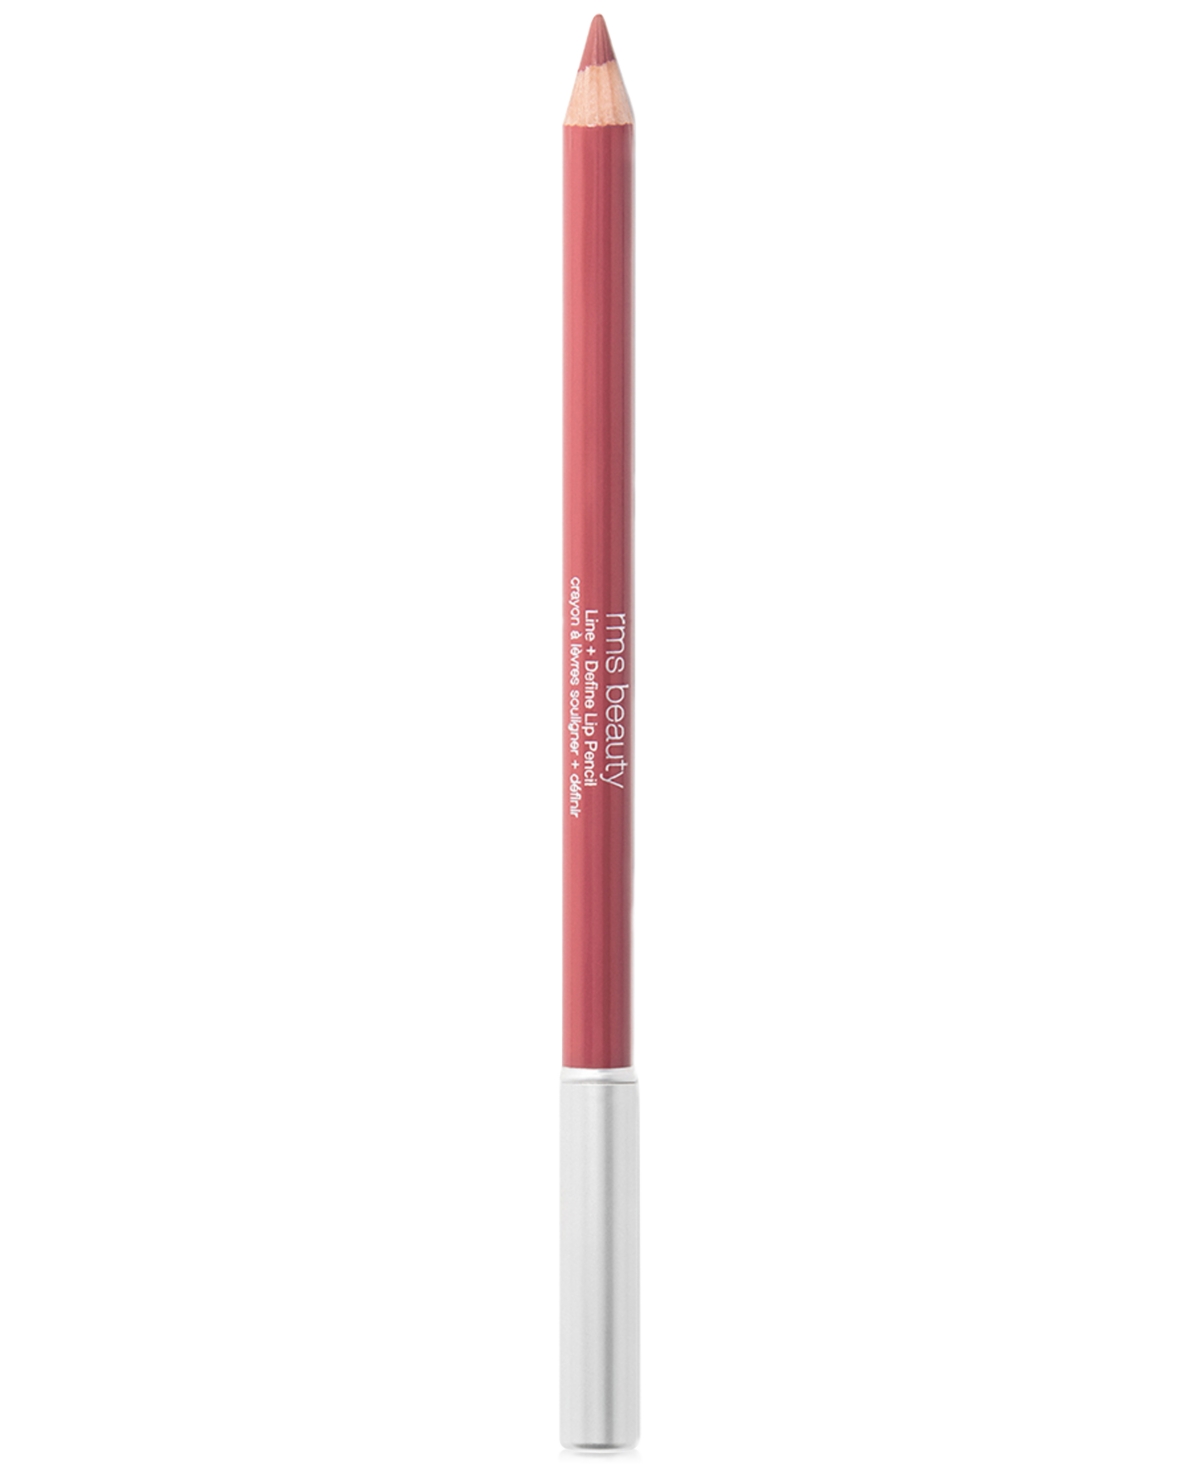 Rms Beauty Go Nude Lip Pencil In Morning Dew